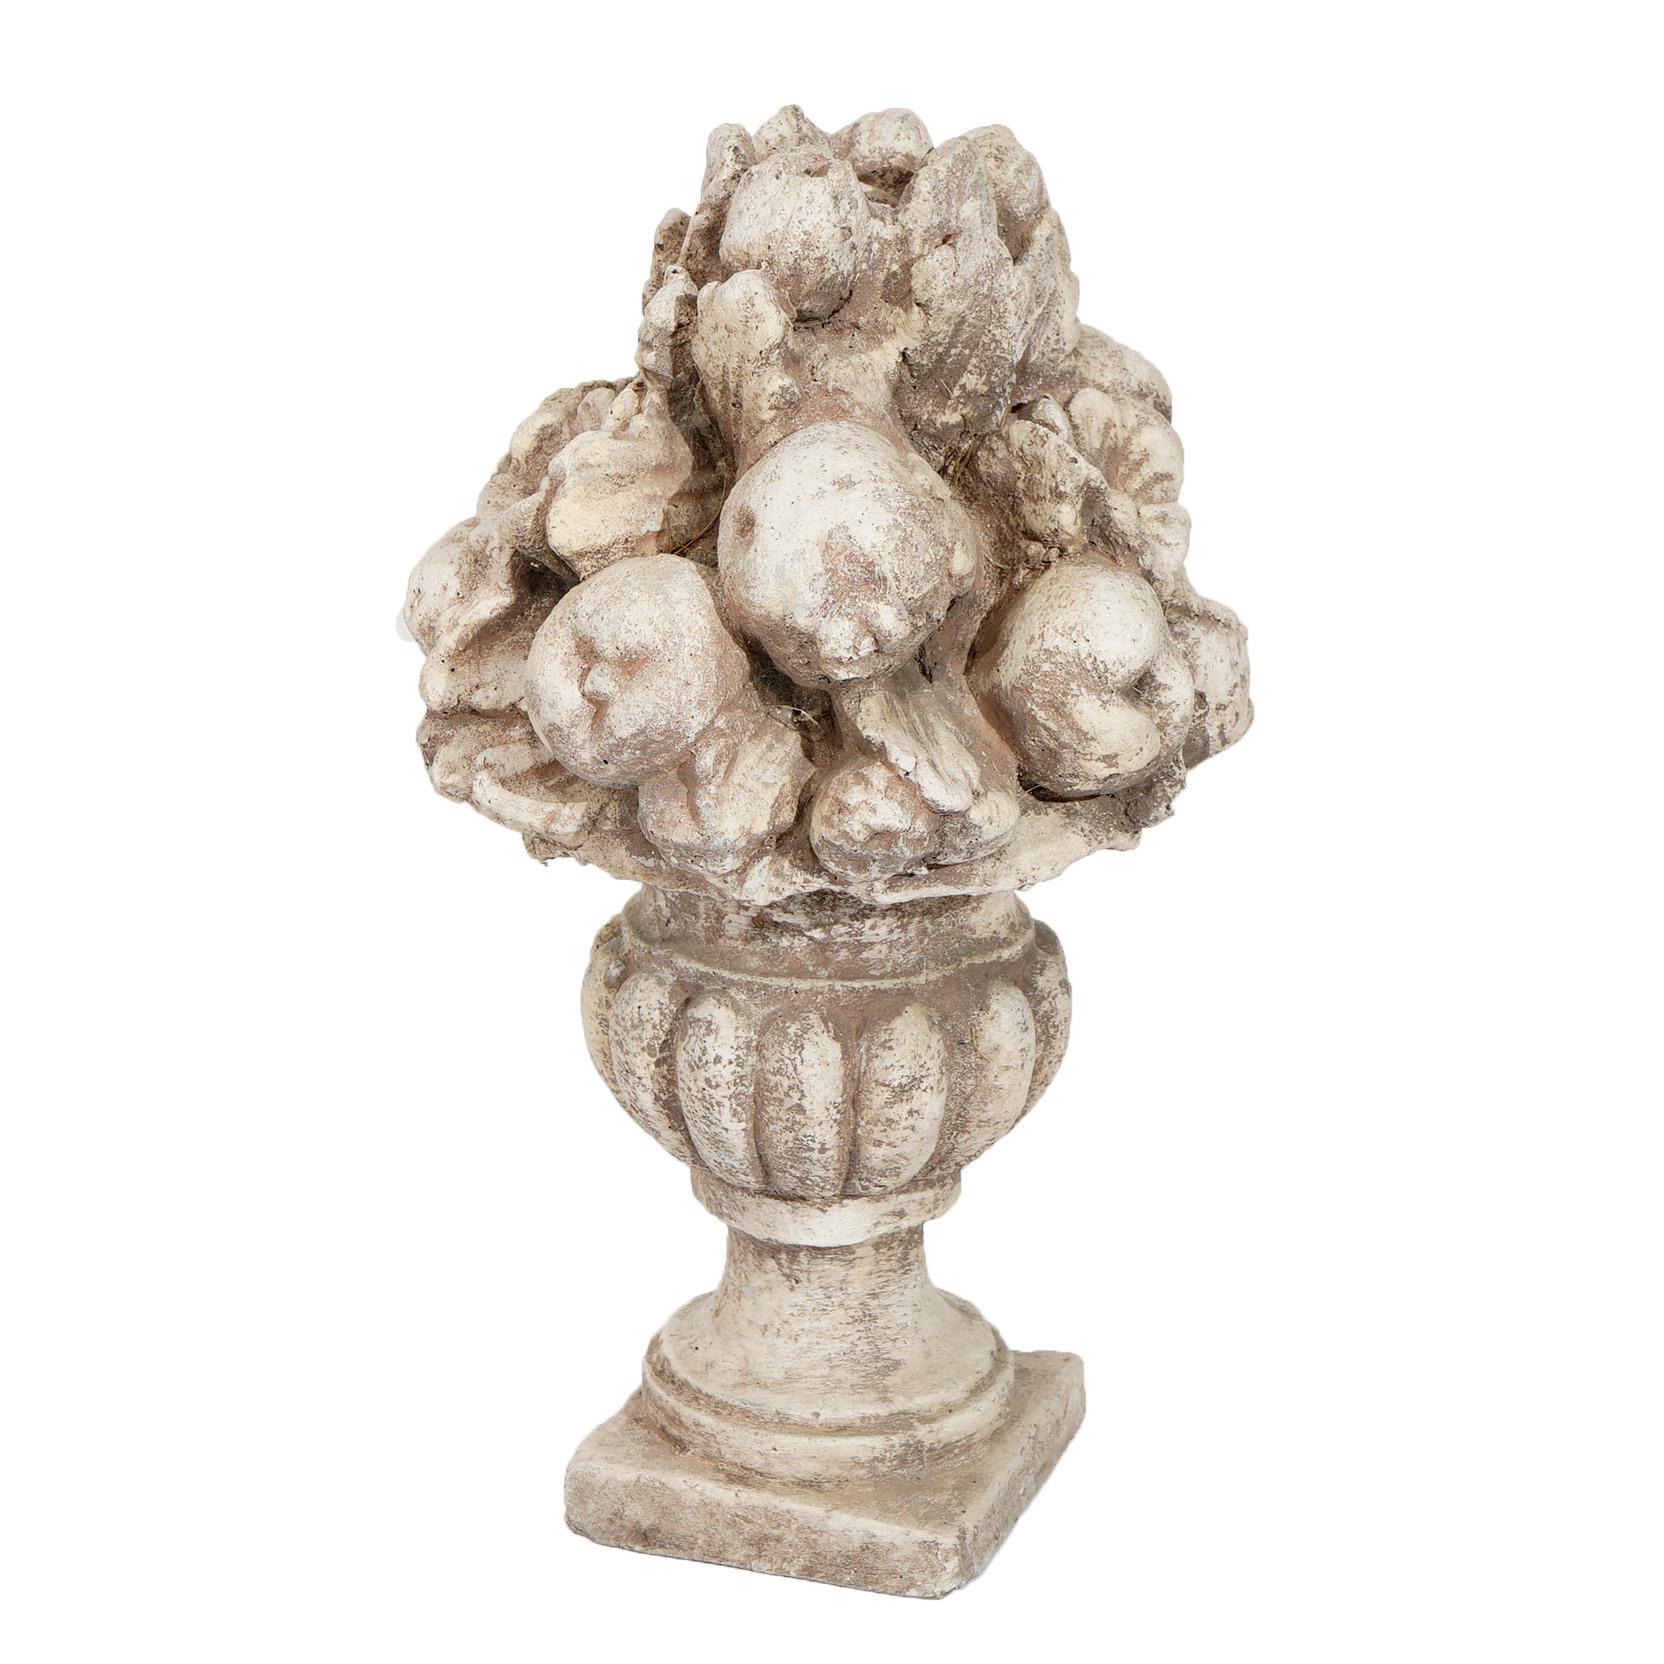 An ornamental garden sculpture offers cast stone construction with fruit and floral melon form urn, 20th century

Measures - 19